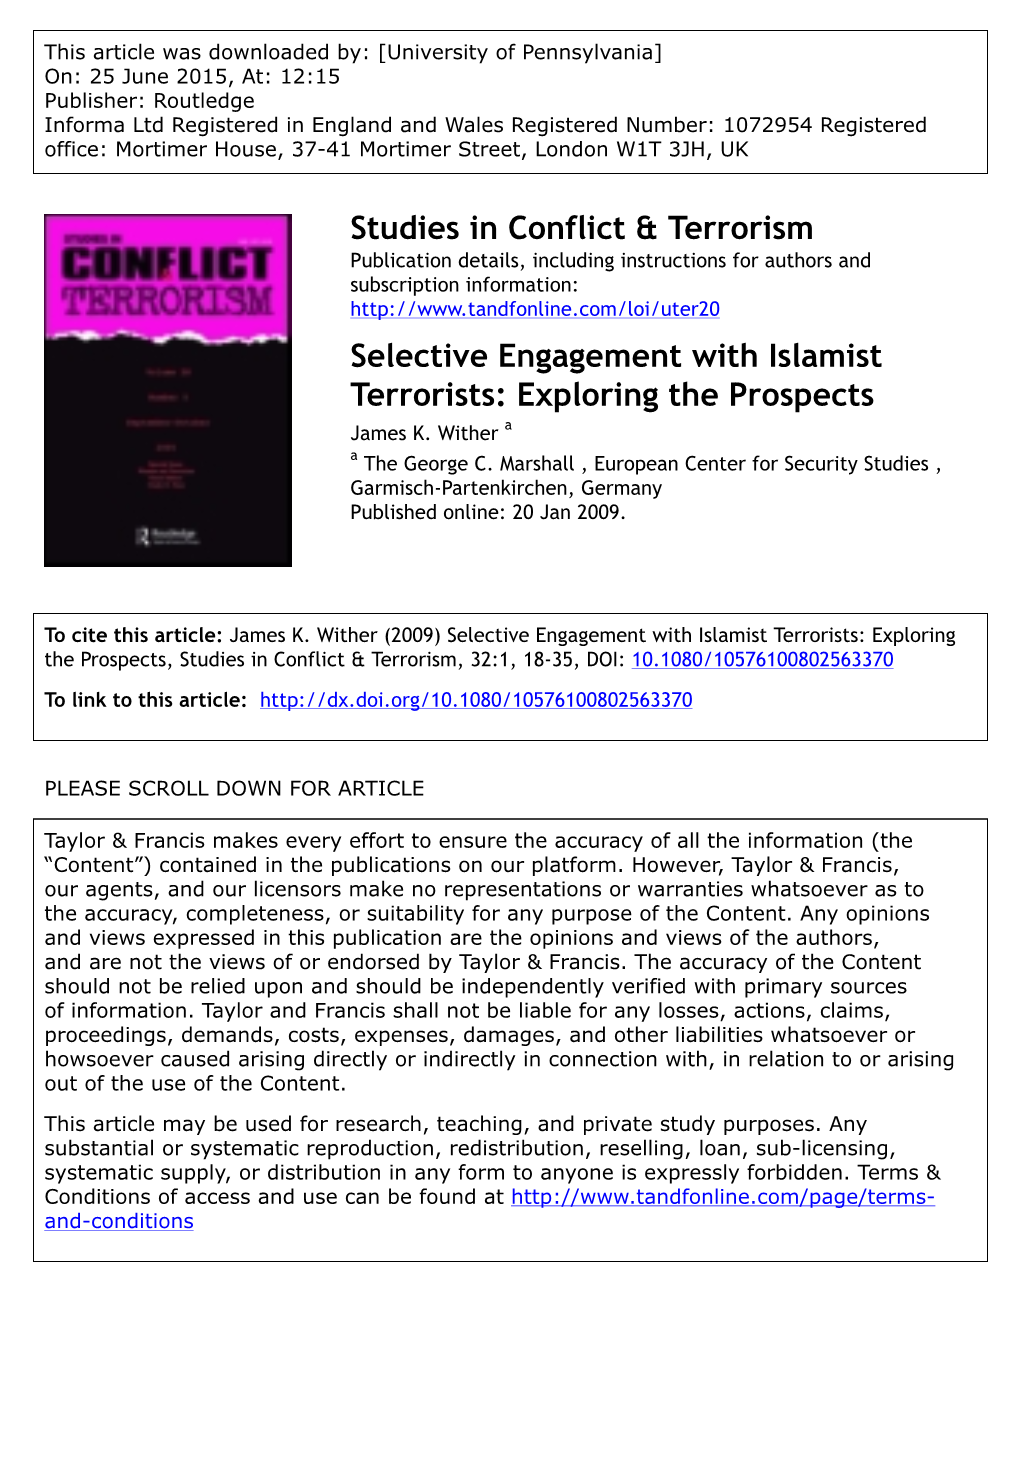 Selective Engagement with Islamist Terrorists: Exploring the Prospects James K